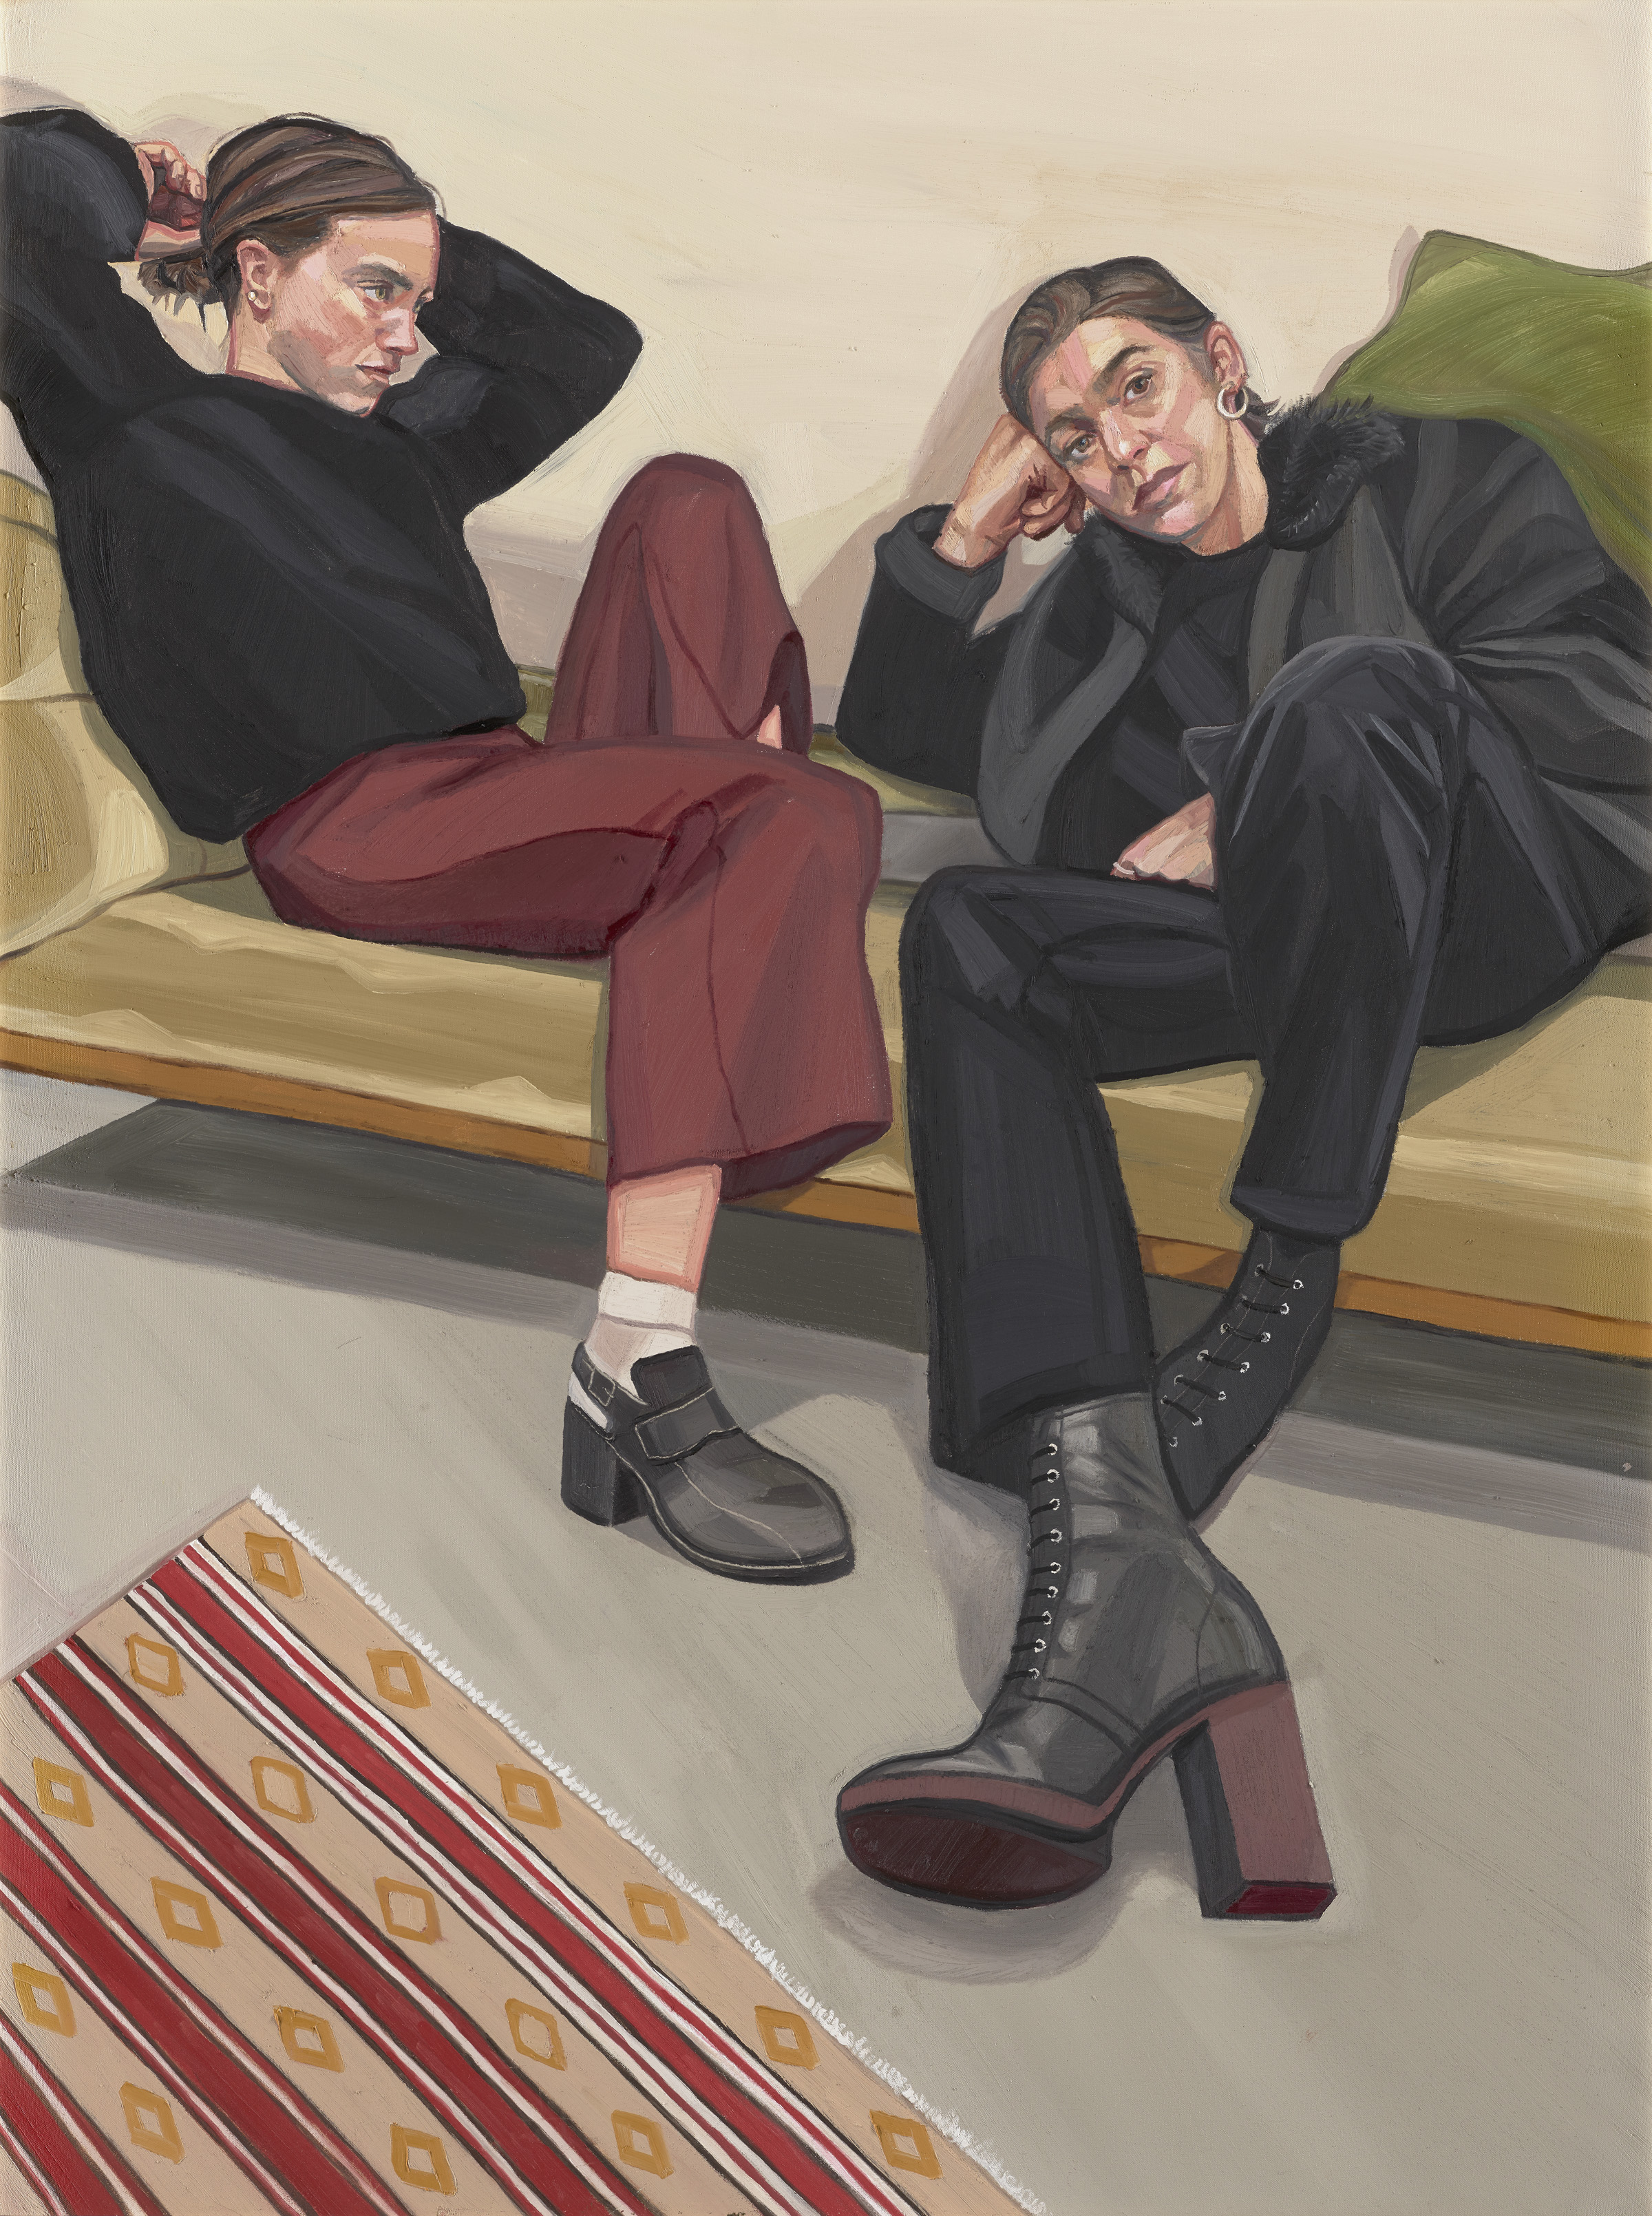 A Portrait Of Two Female Painters by Ania Hobson (Ania Hobson)